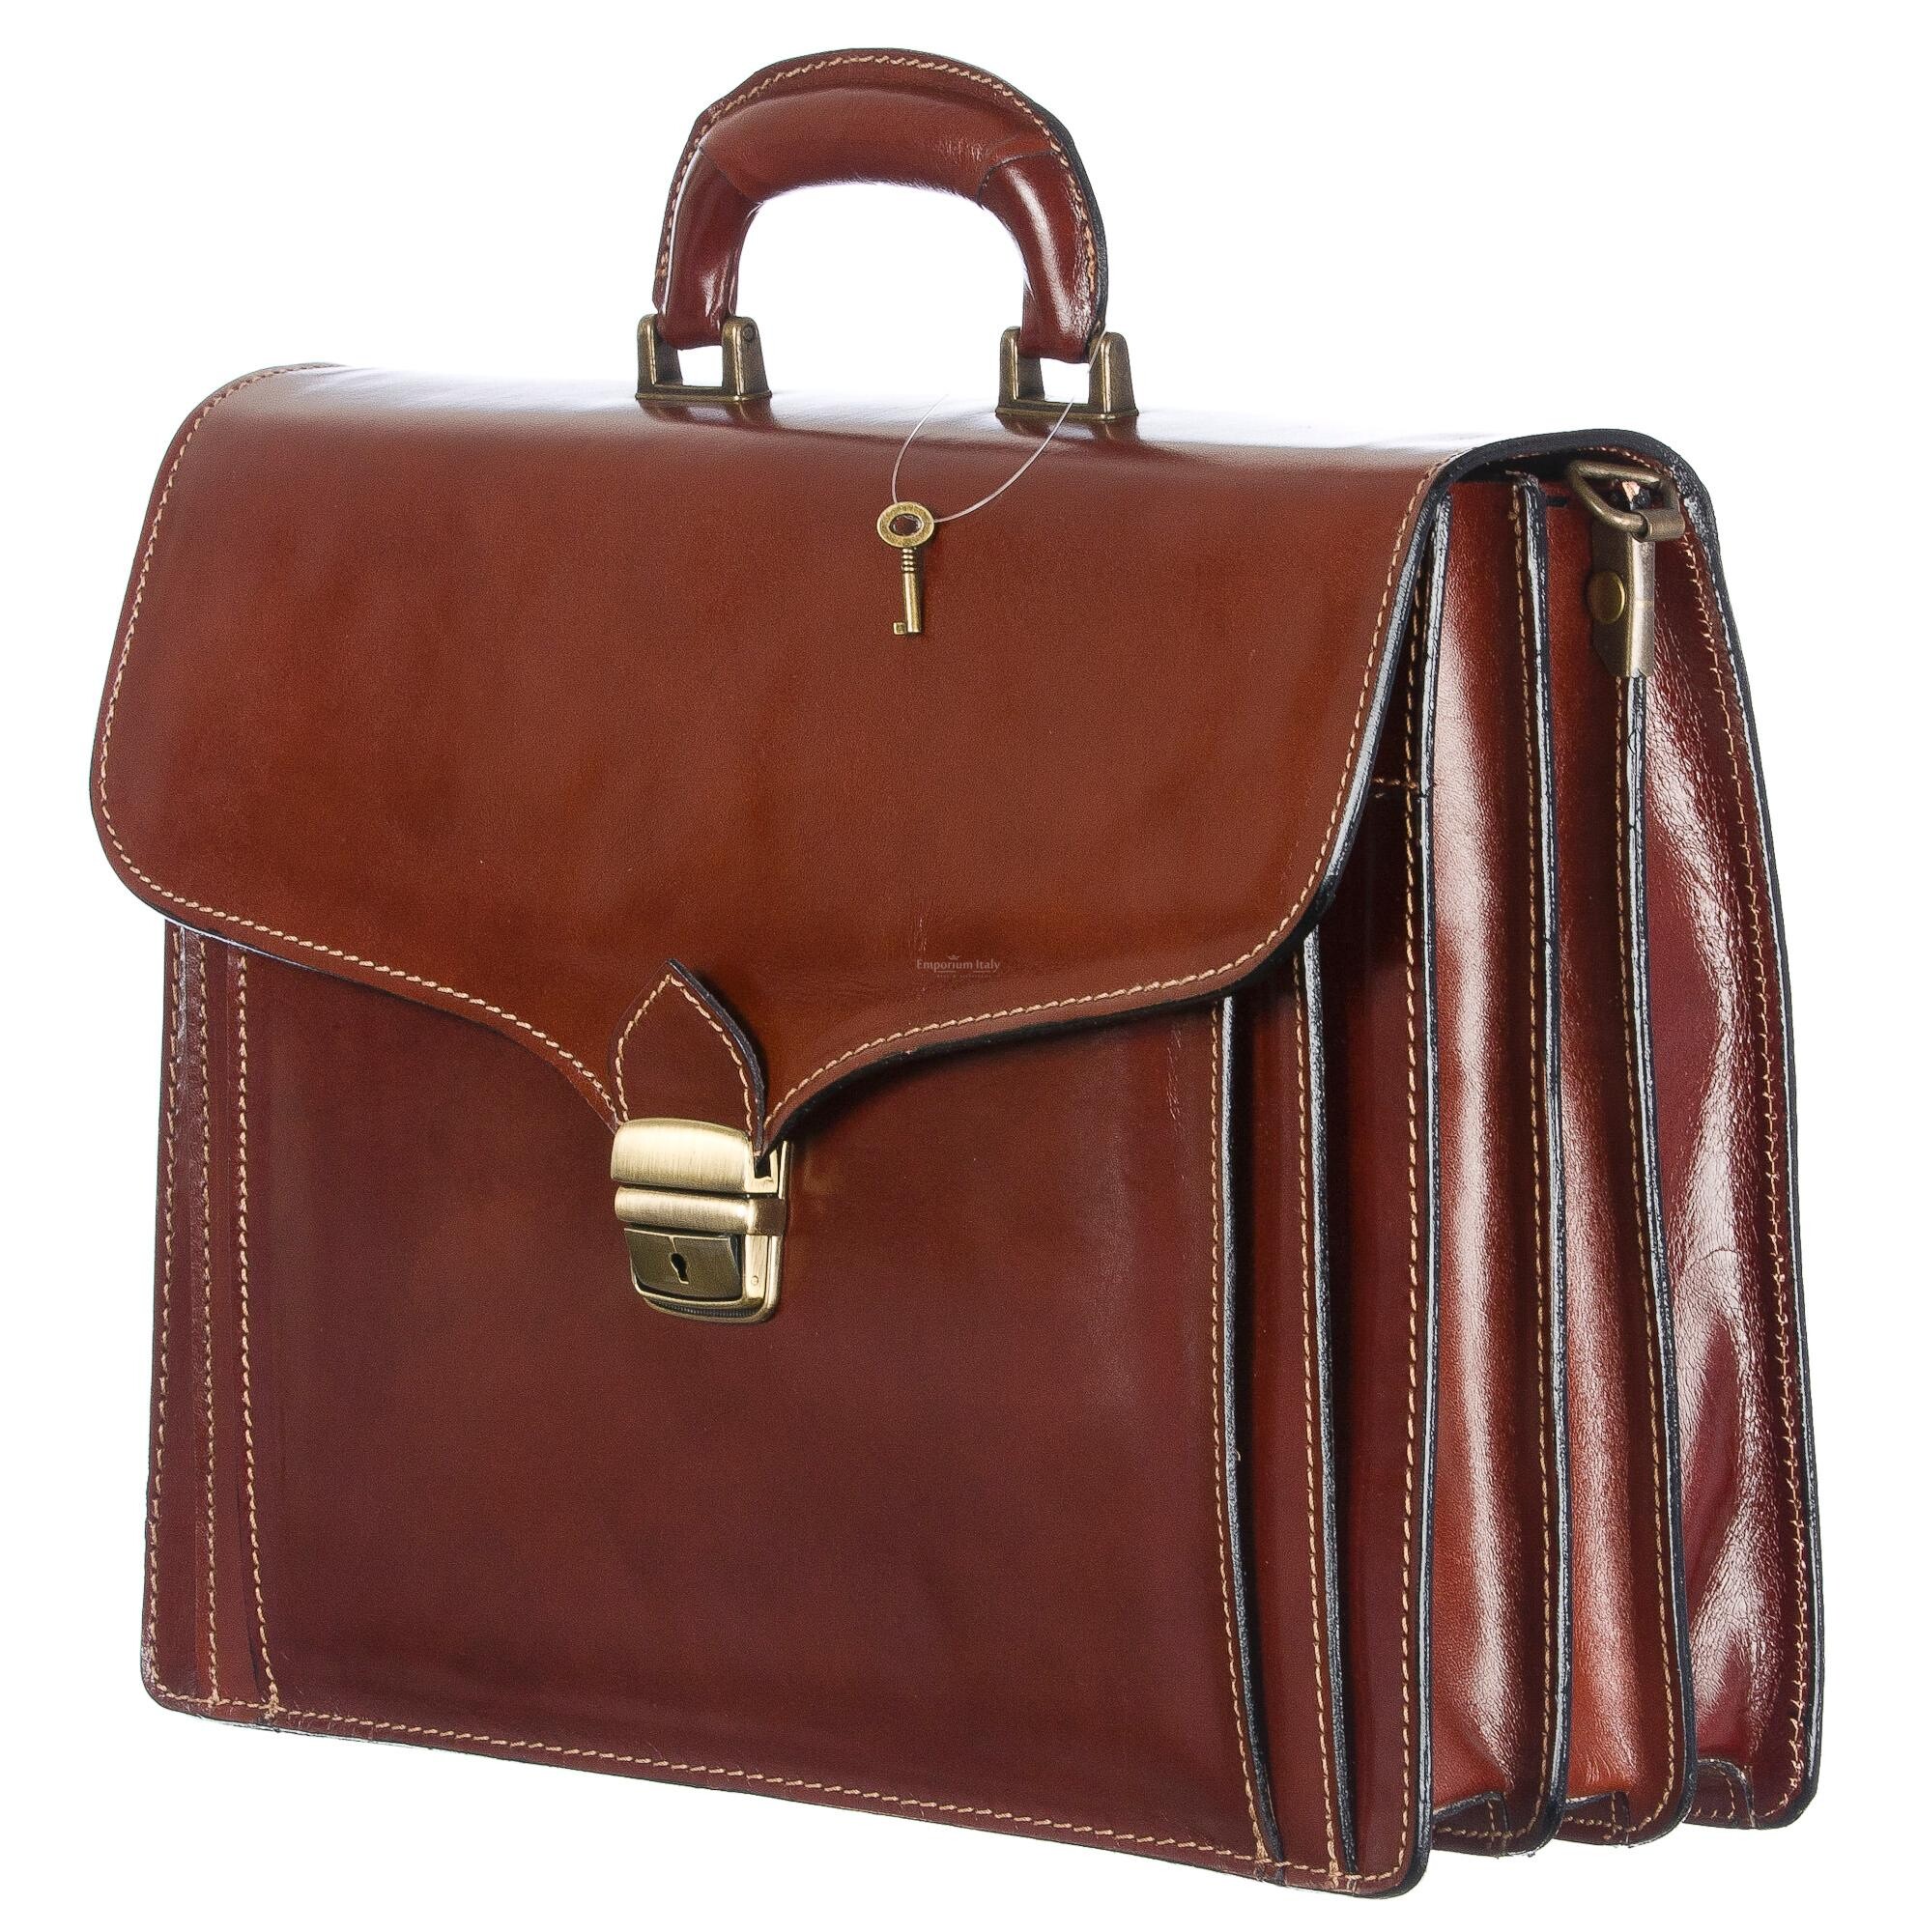 Work / Office mans bag buffered real leather mod. ALESSANDRO